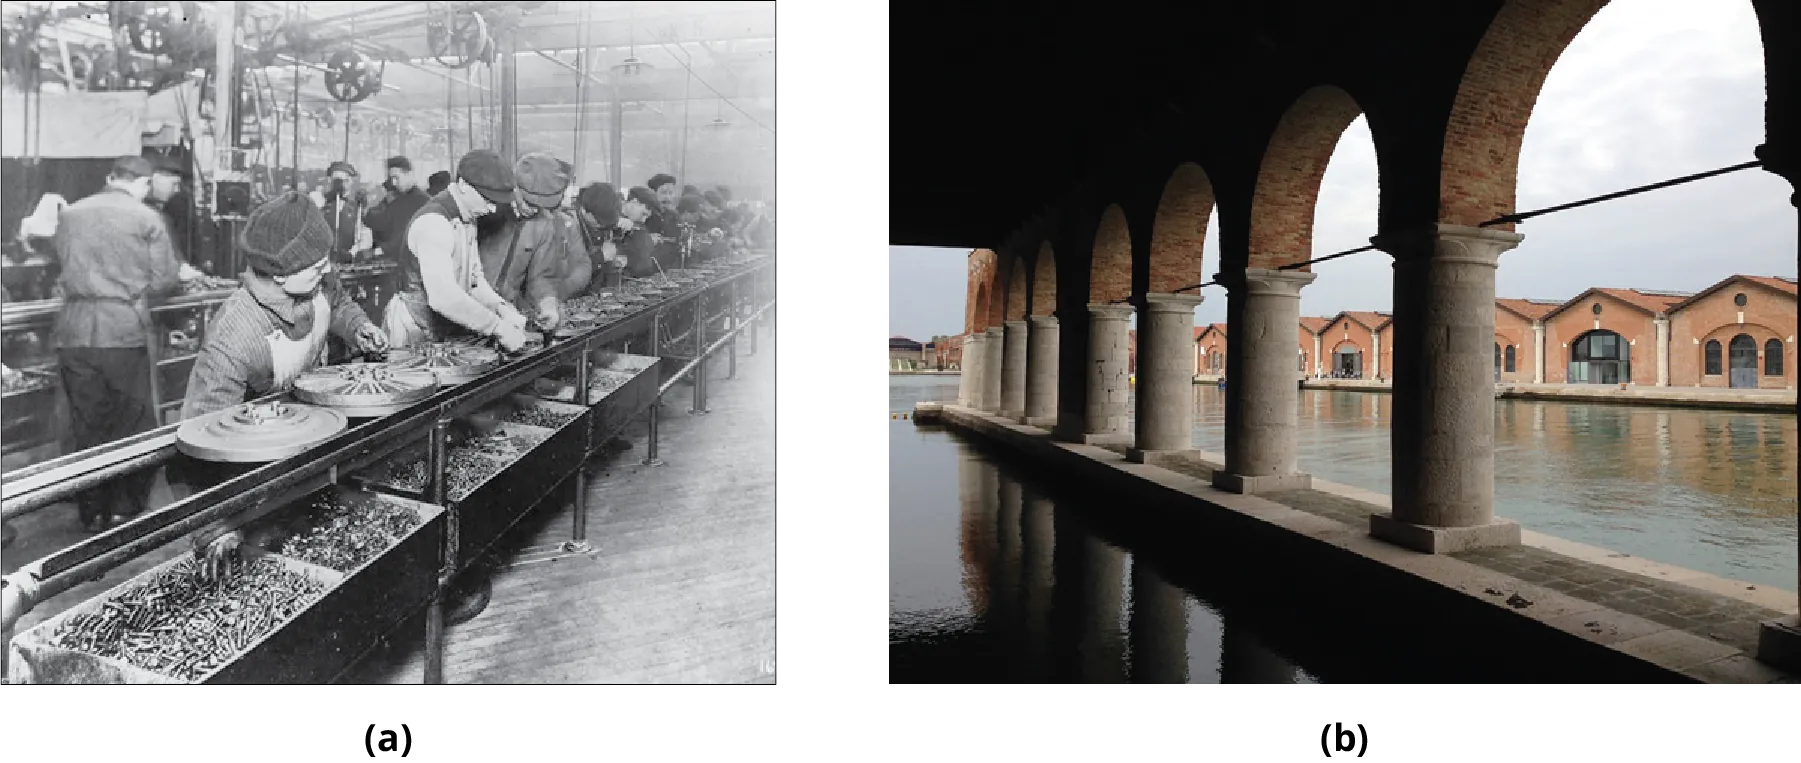 (a) Photo of workers on an assembly line. (b) Photo of the Venetian Arsenal.